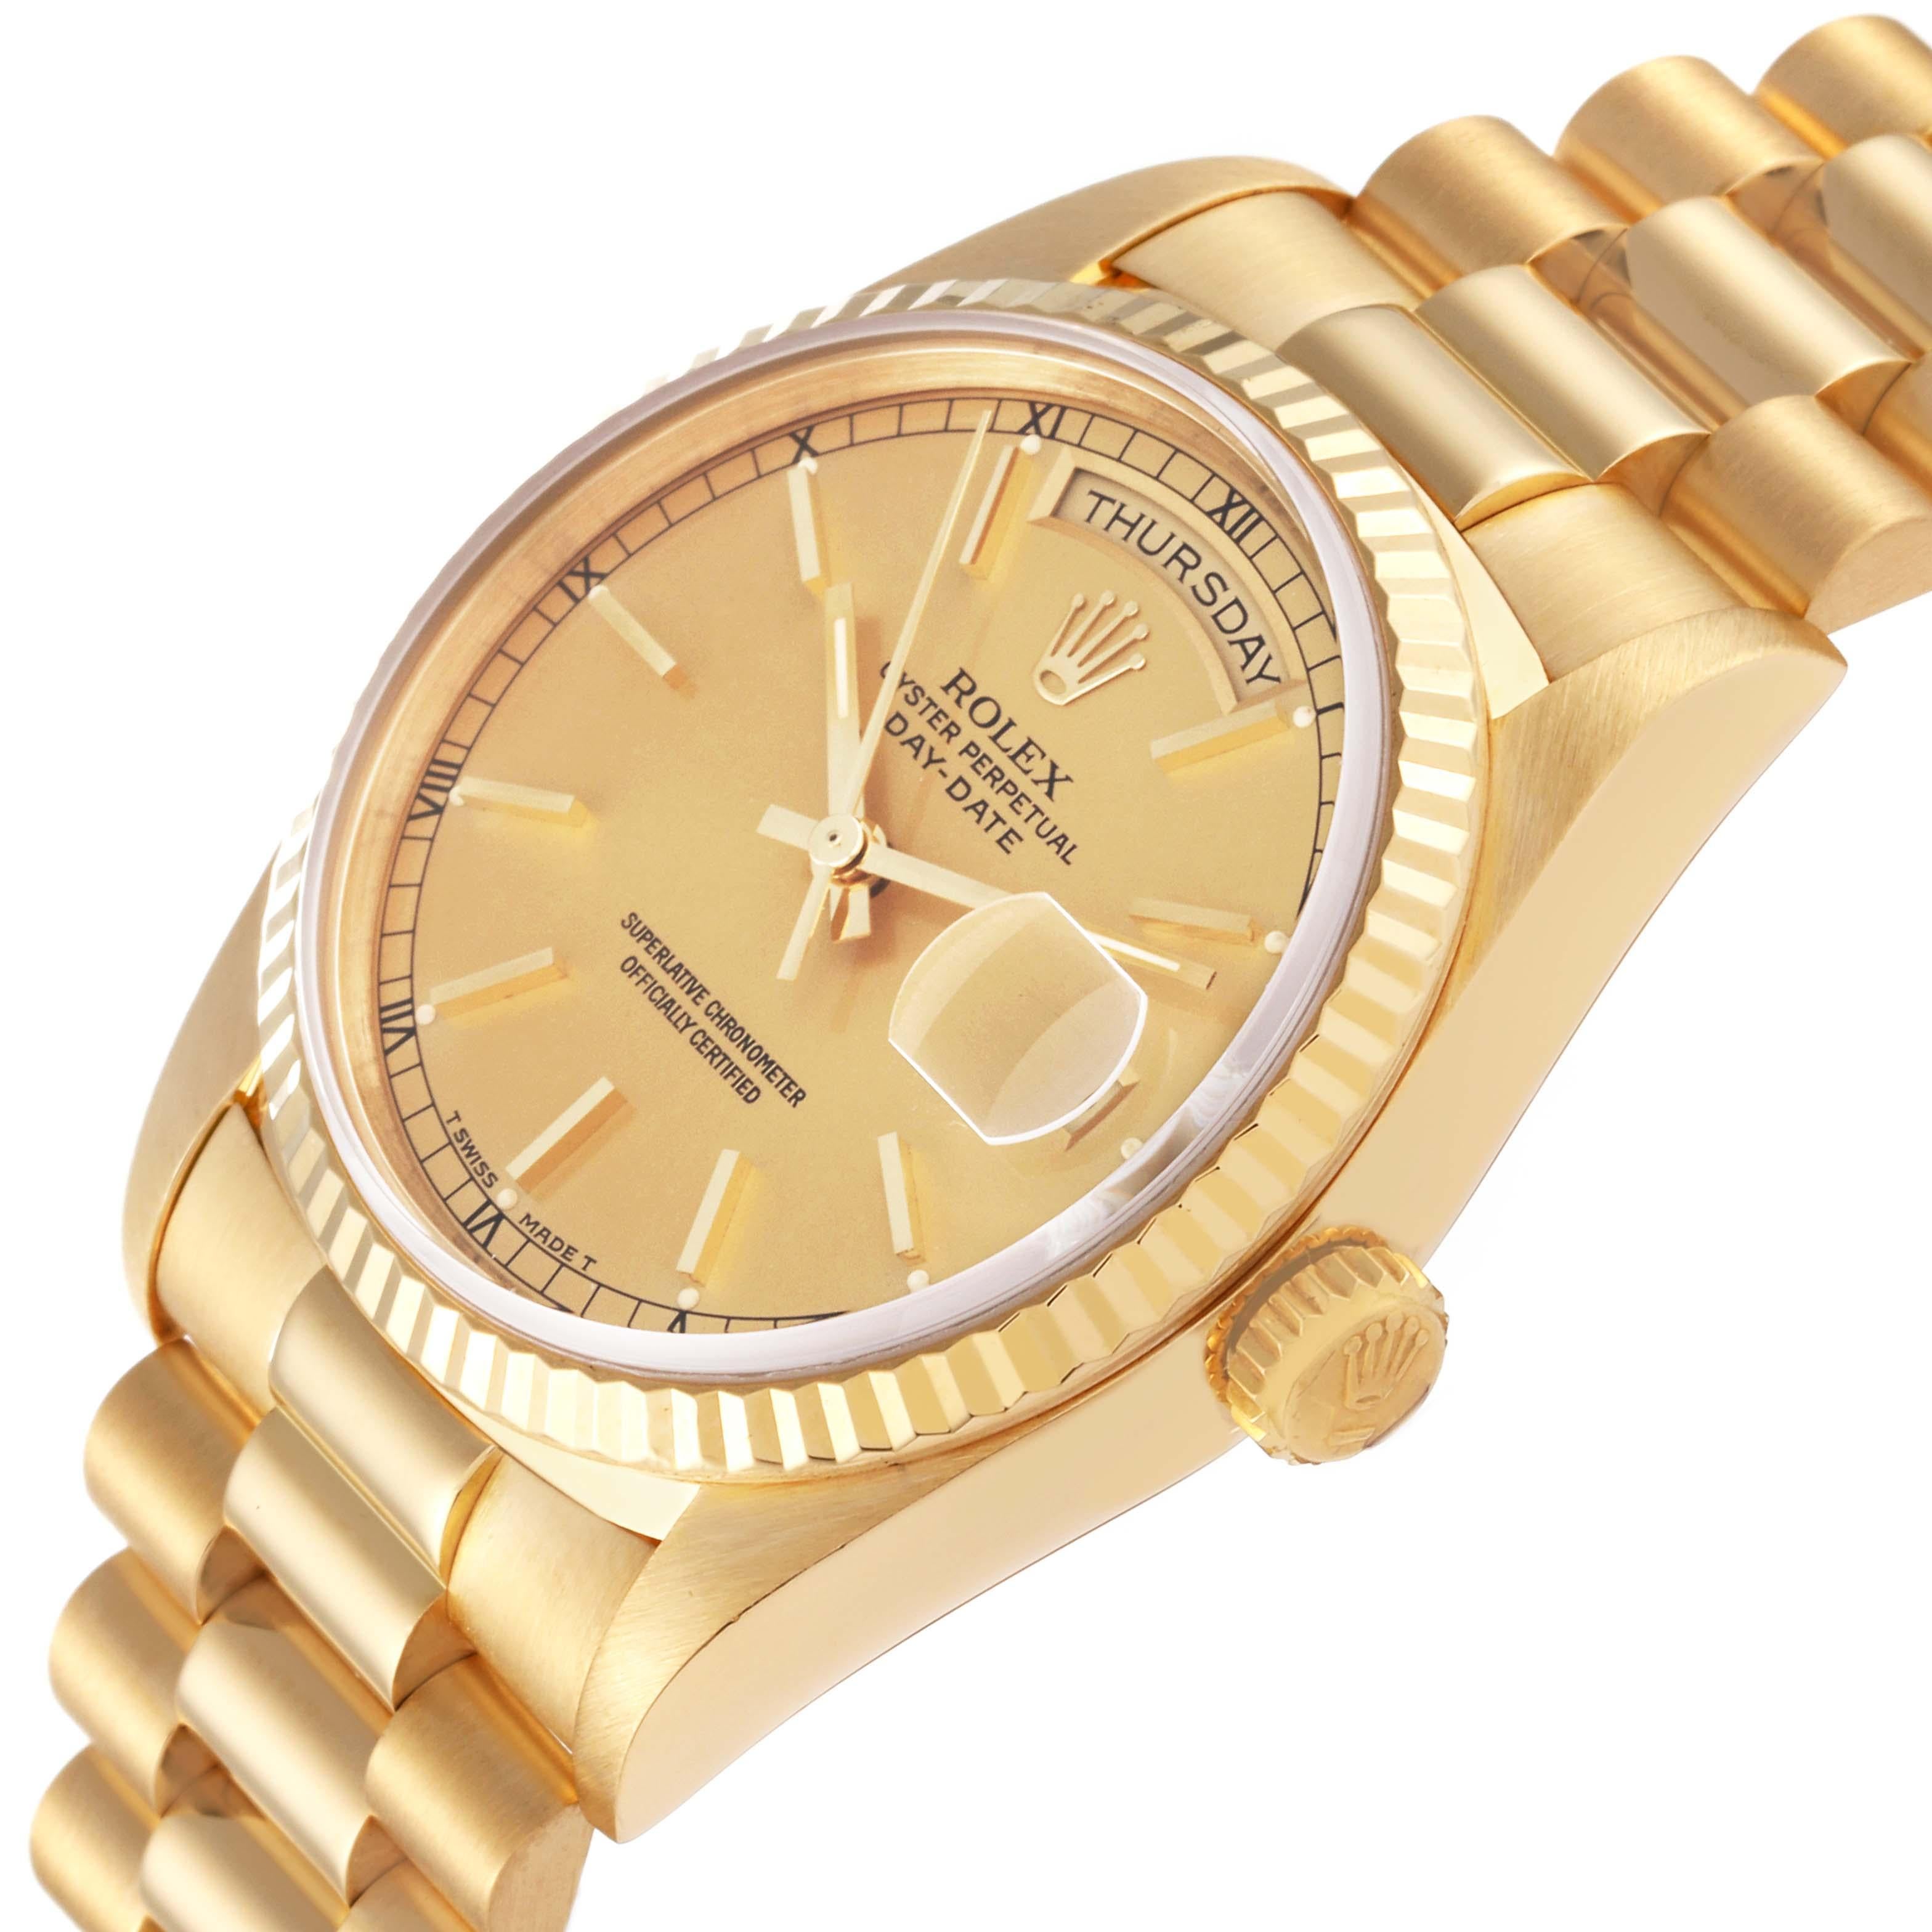 Rolex President Day-Date Yellow Gold Champagne Dial Mens Watch 18238 Box Papers 2